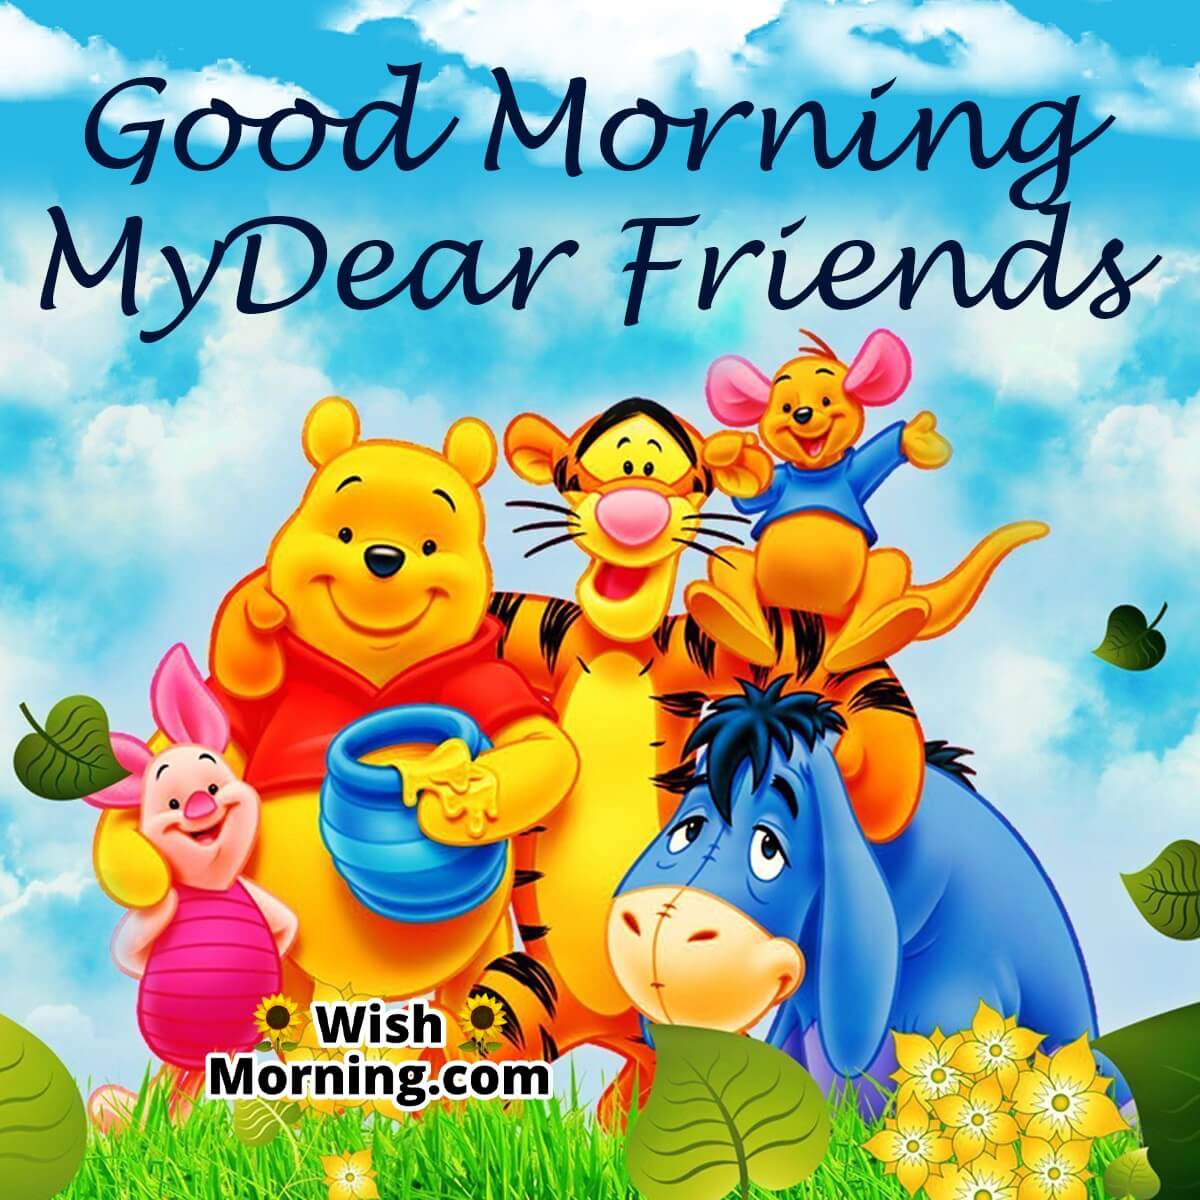 Good Morning Friends Images - Wish Morning